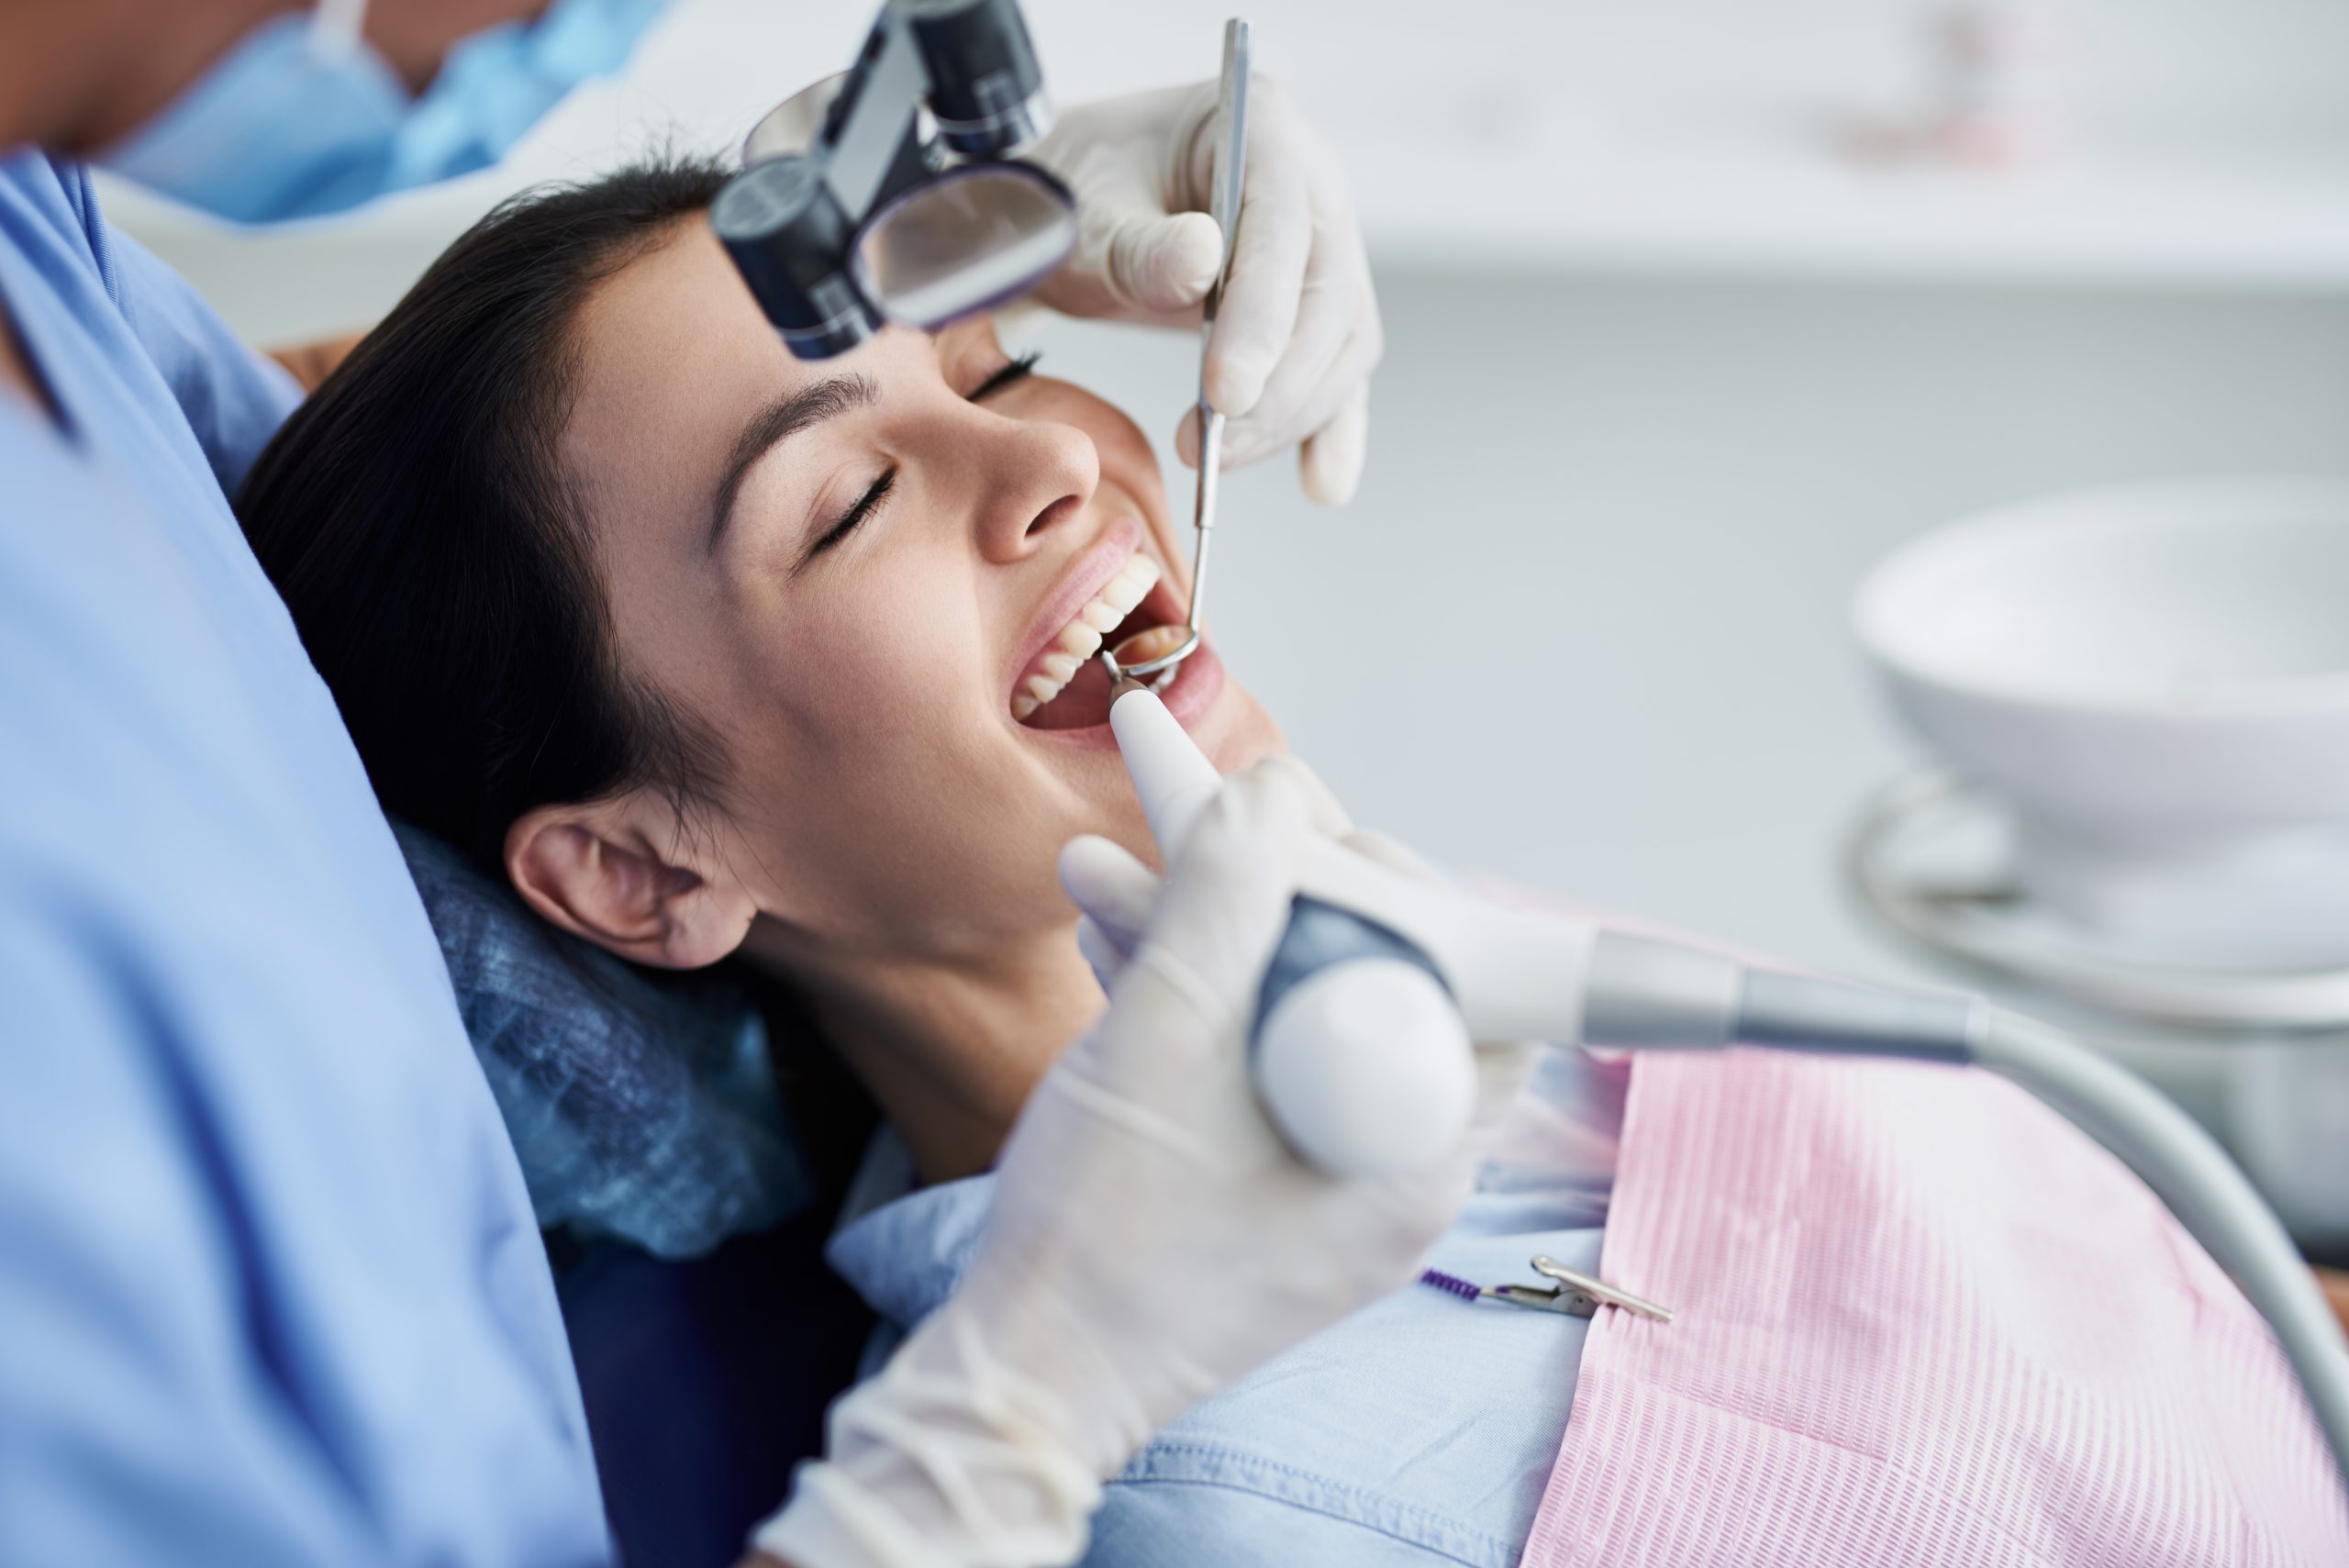 Young woman with closed eyes having dental procedure at clinic